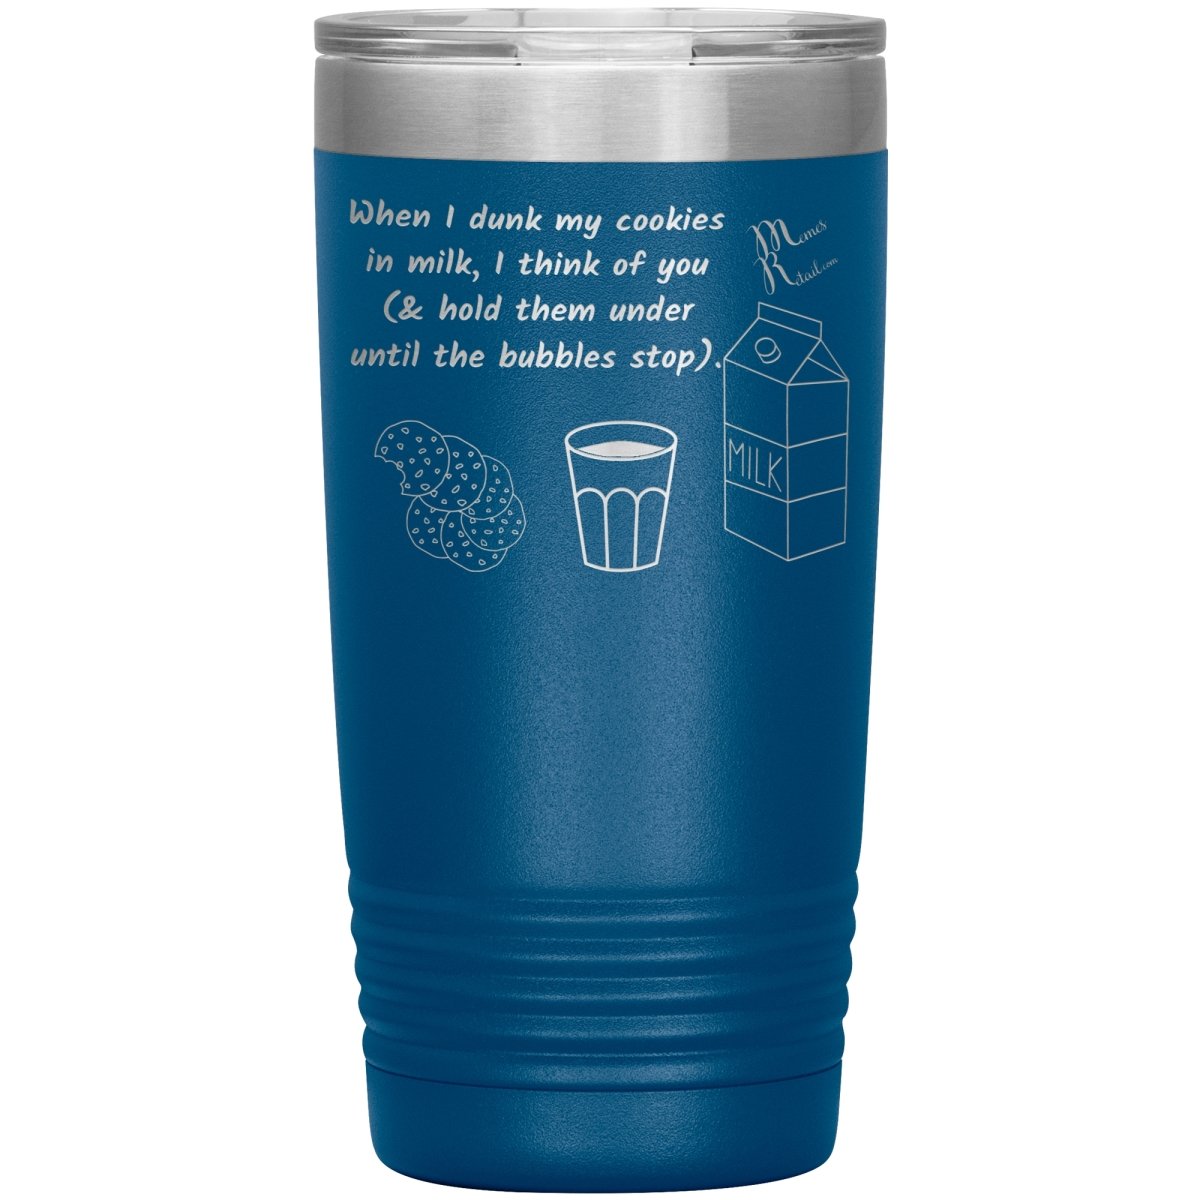 When I dunk My Cookies in Milk, I think of You - Tumblers, 20oz Insulated Tumbler / Blue - MemesRetail.com